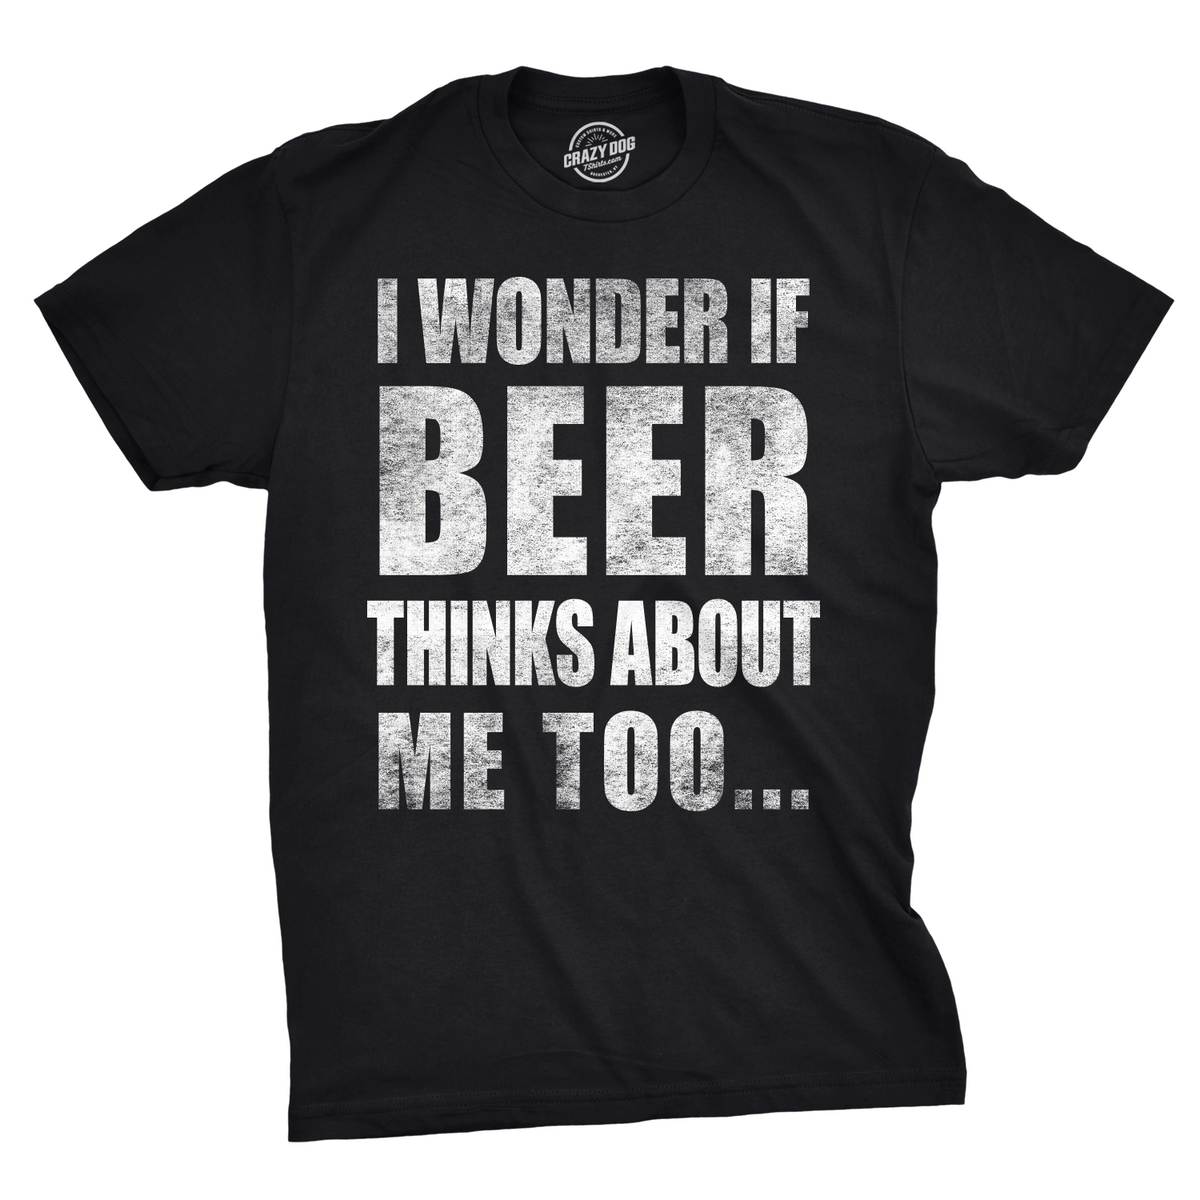 Funny Black Wonder if Beer Thinks About Me Mens T Shirt Nerdy Saint Patrick&#39;s Day Beer Drinking Tee